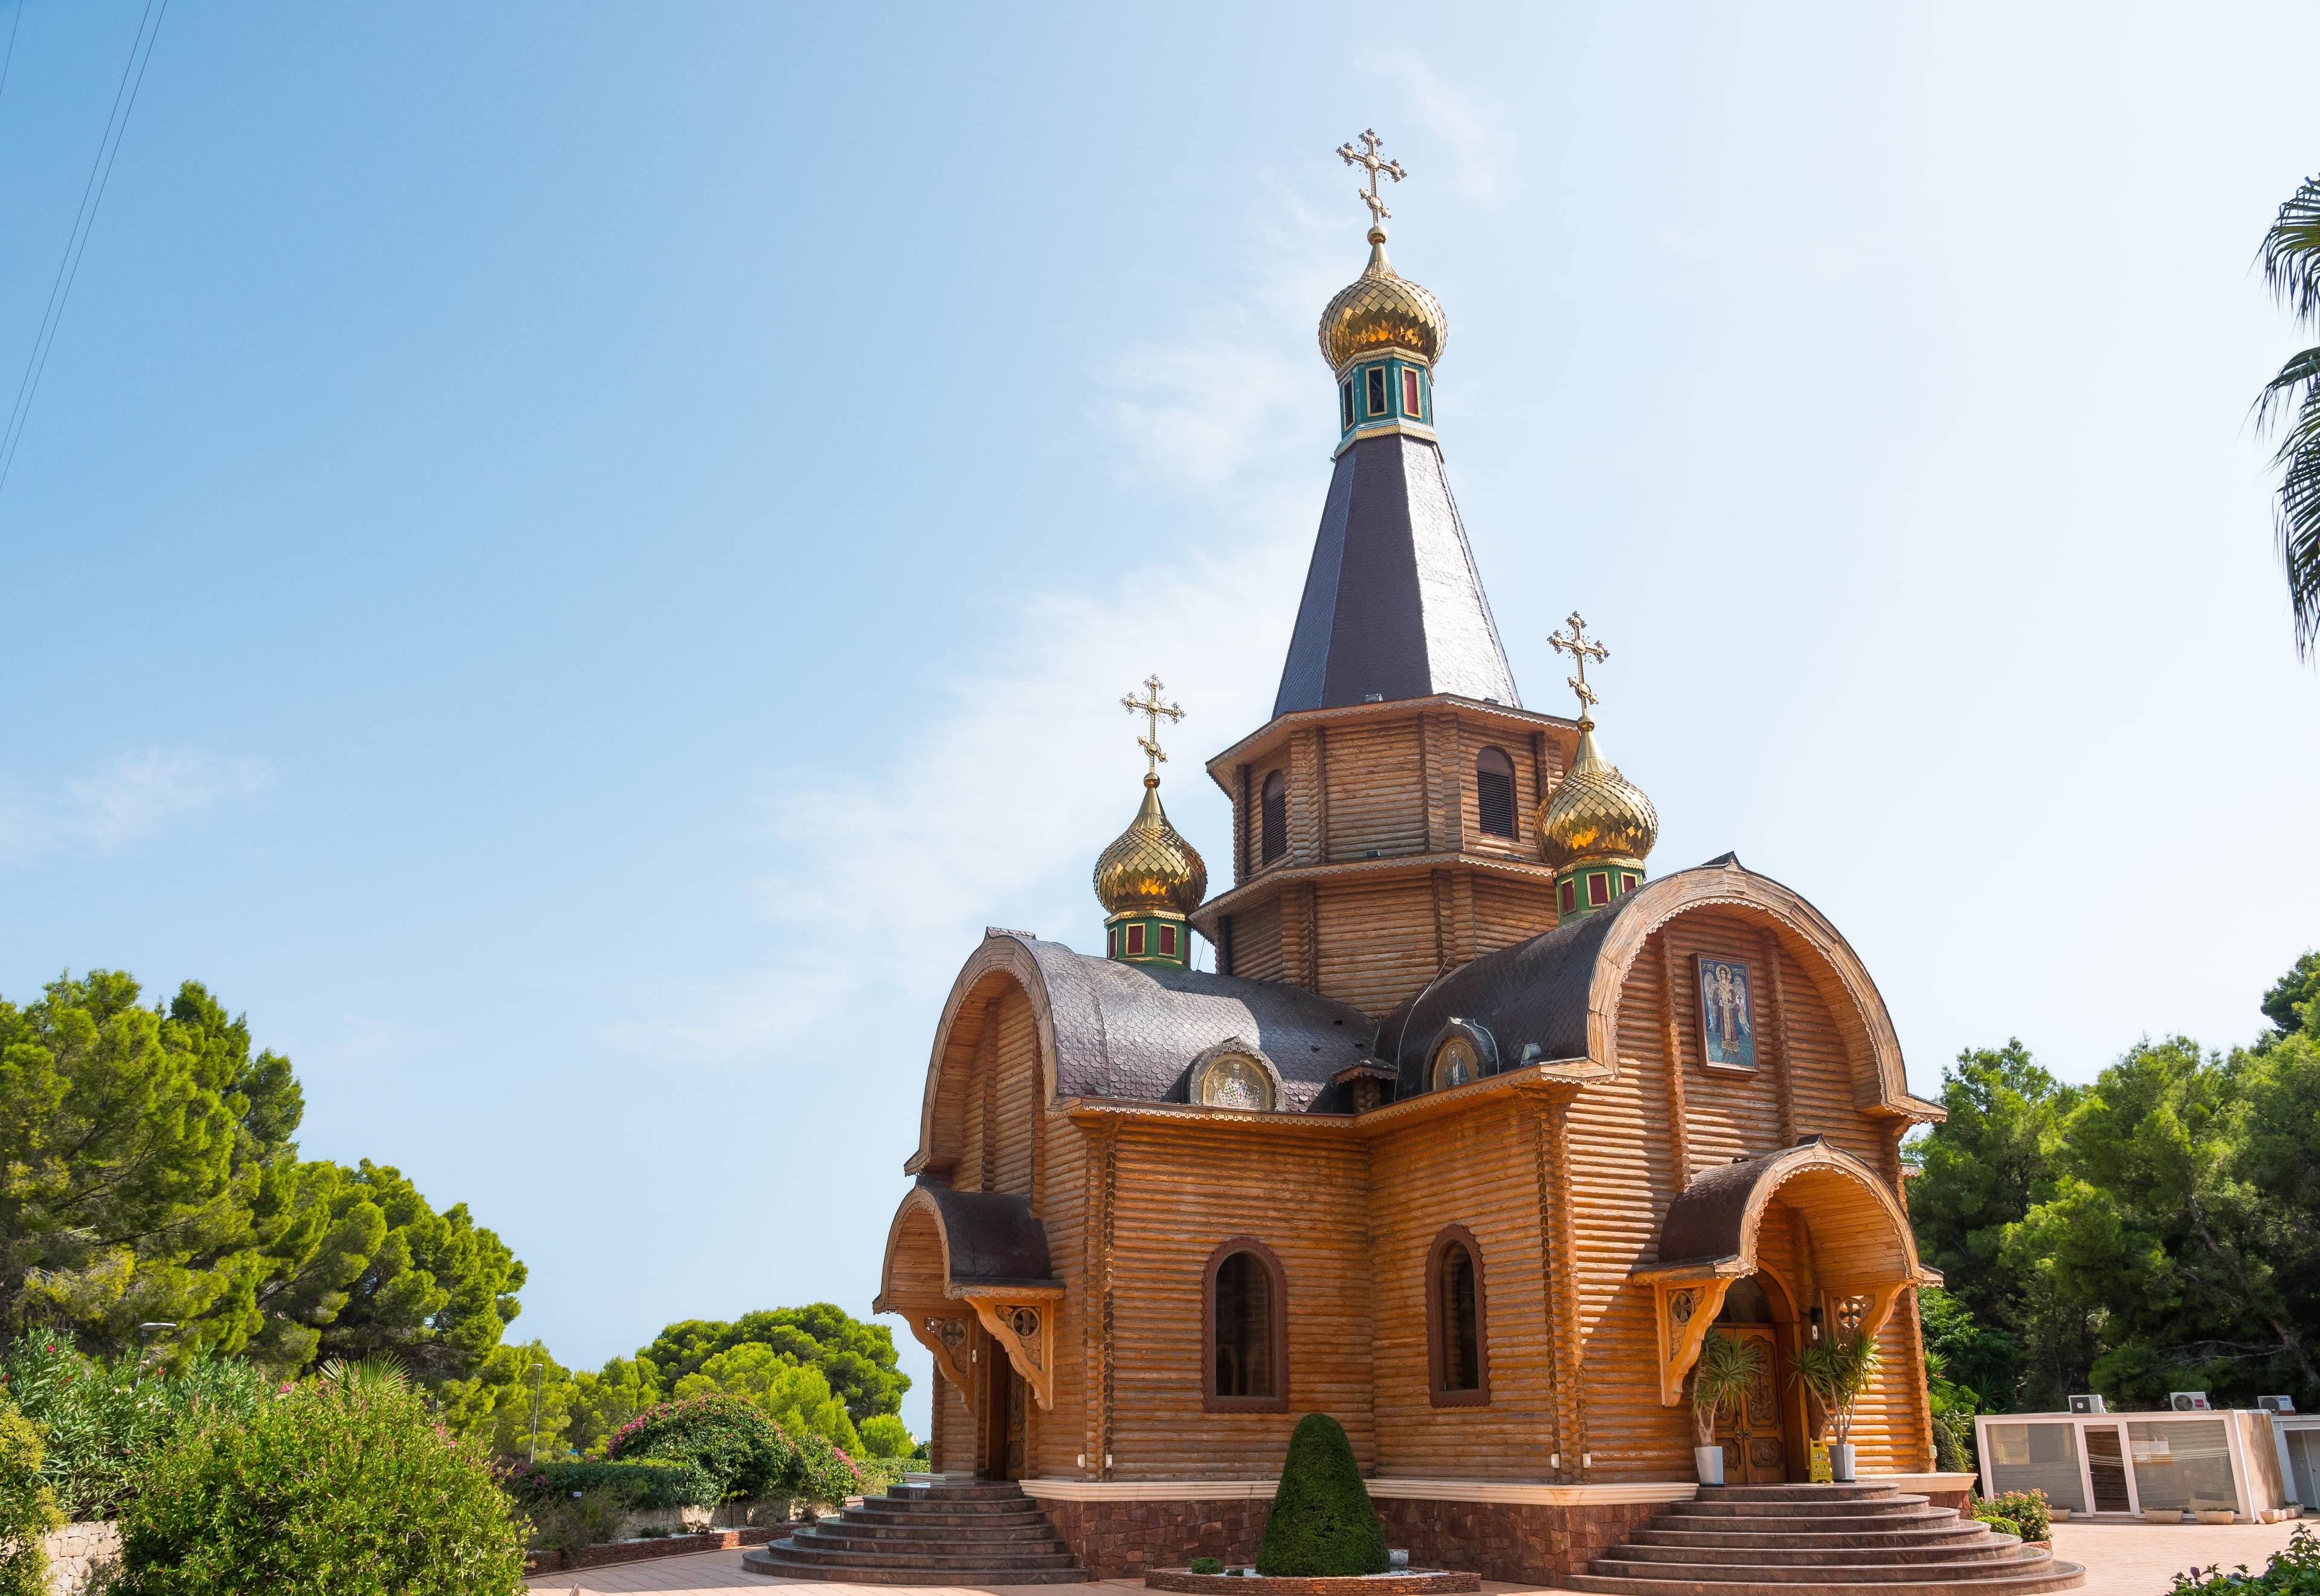 Russian Orthodox Church of St. Michael the Archangel